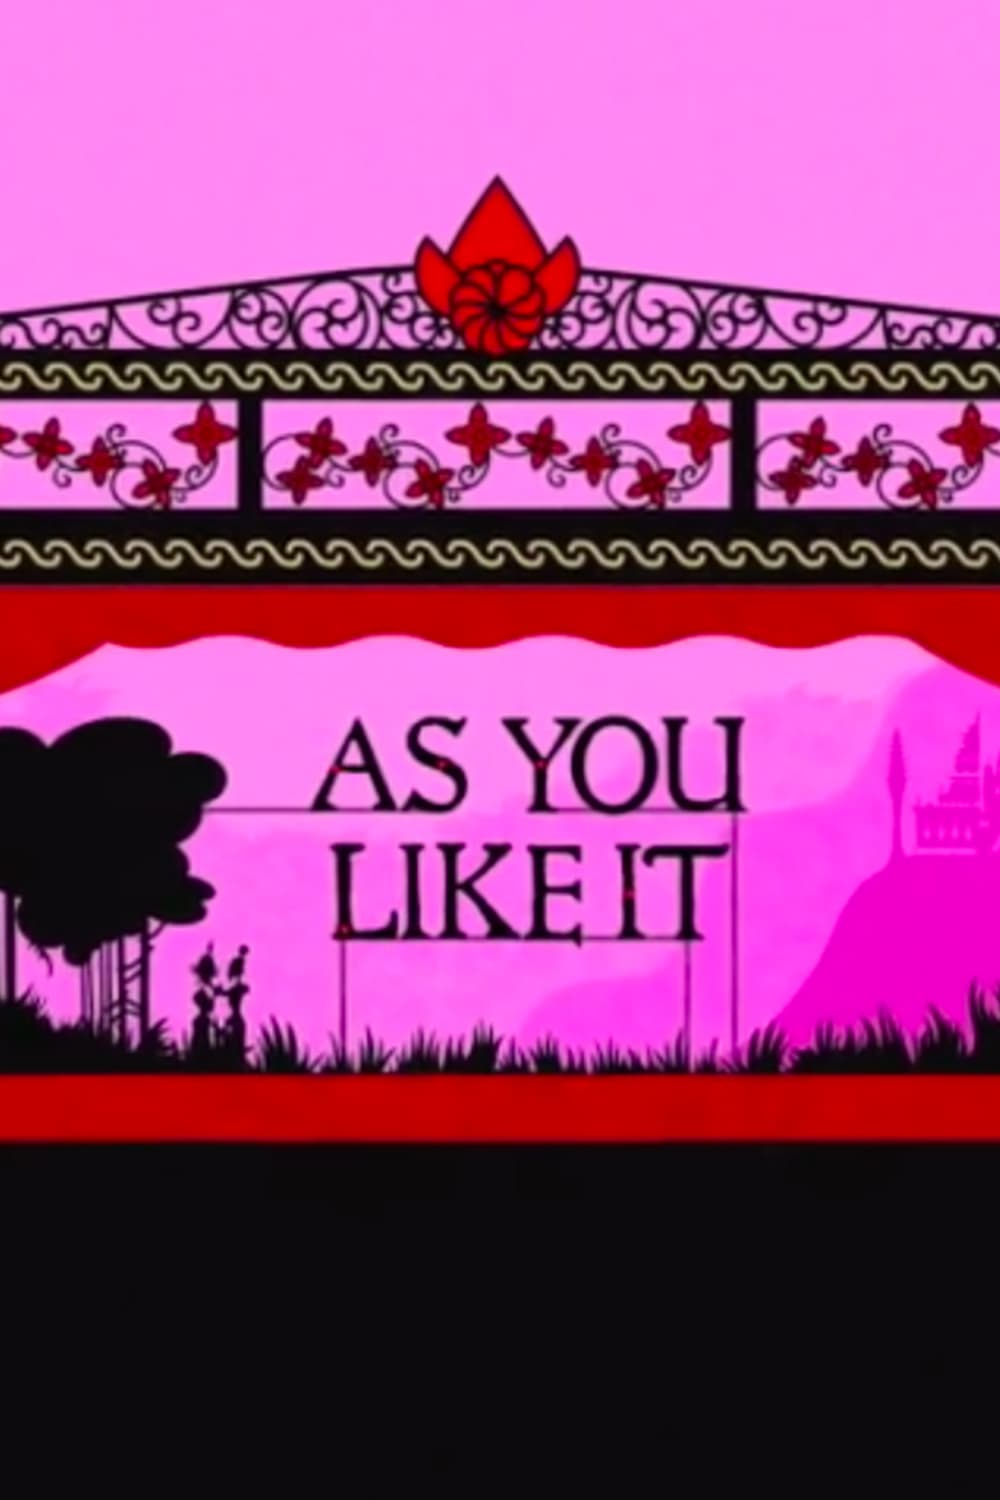 As You Like It poster, featuring a bridge across a pink landscape